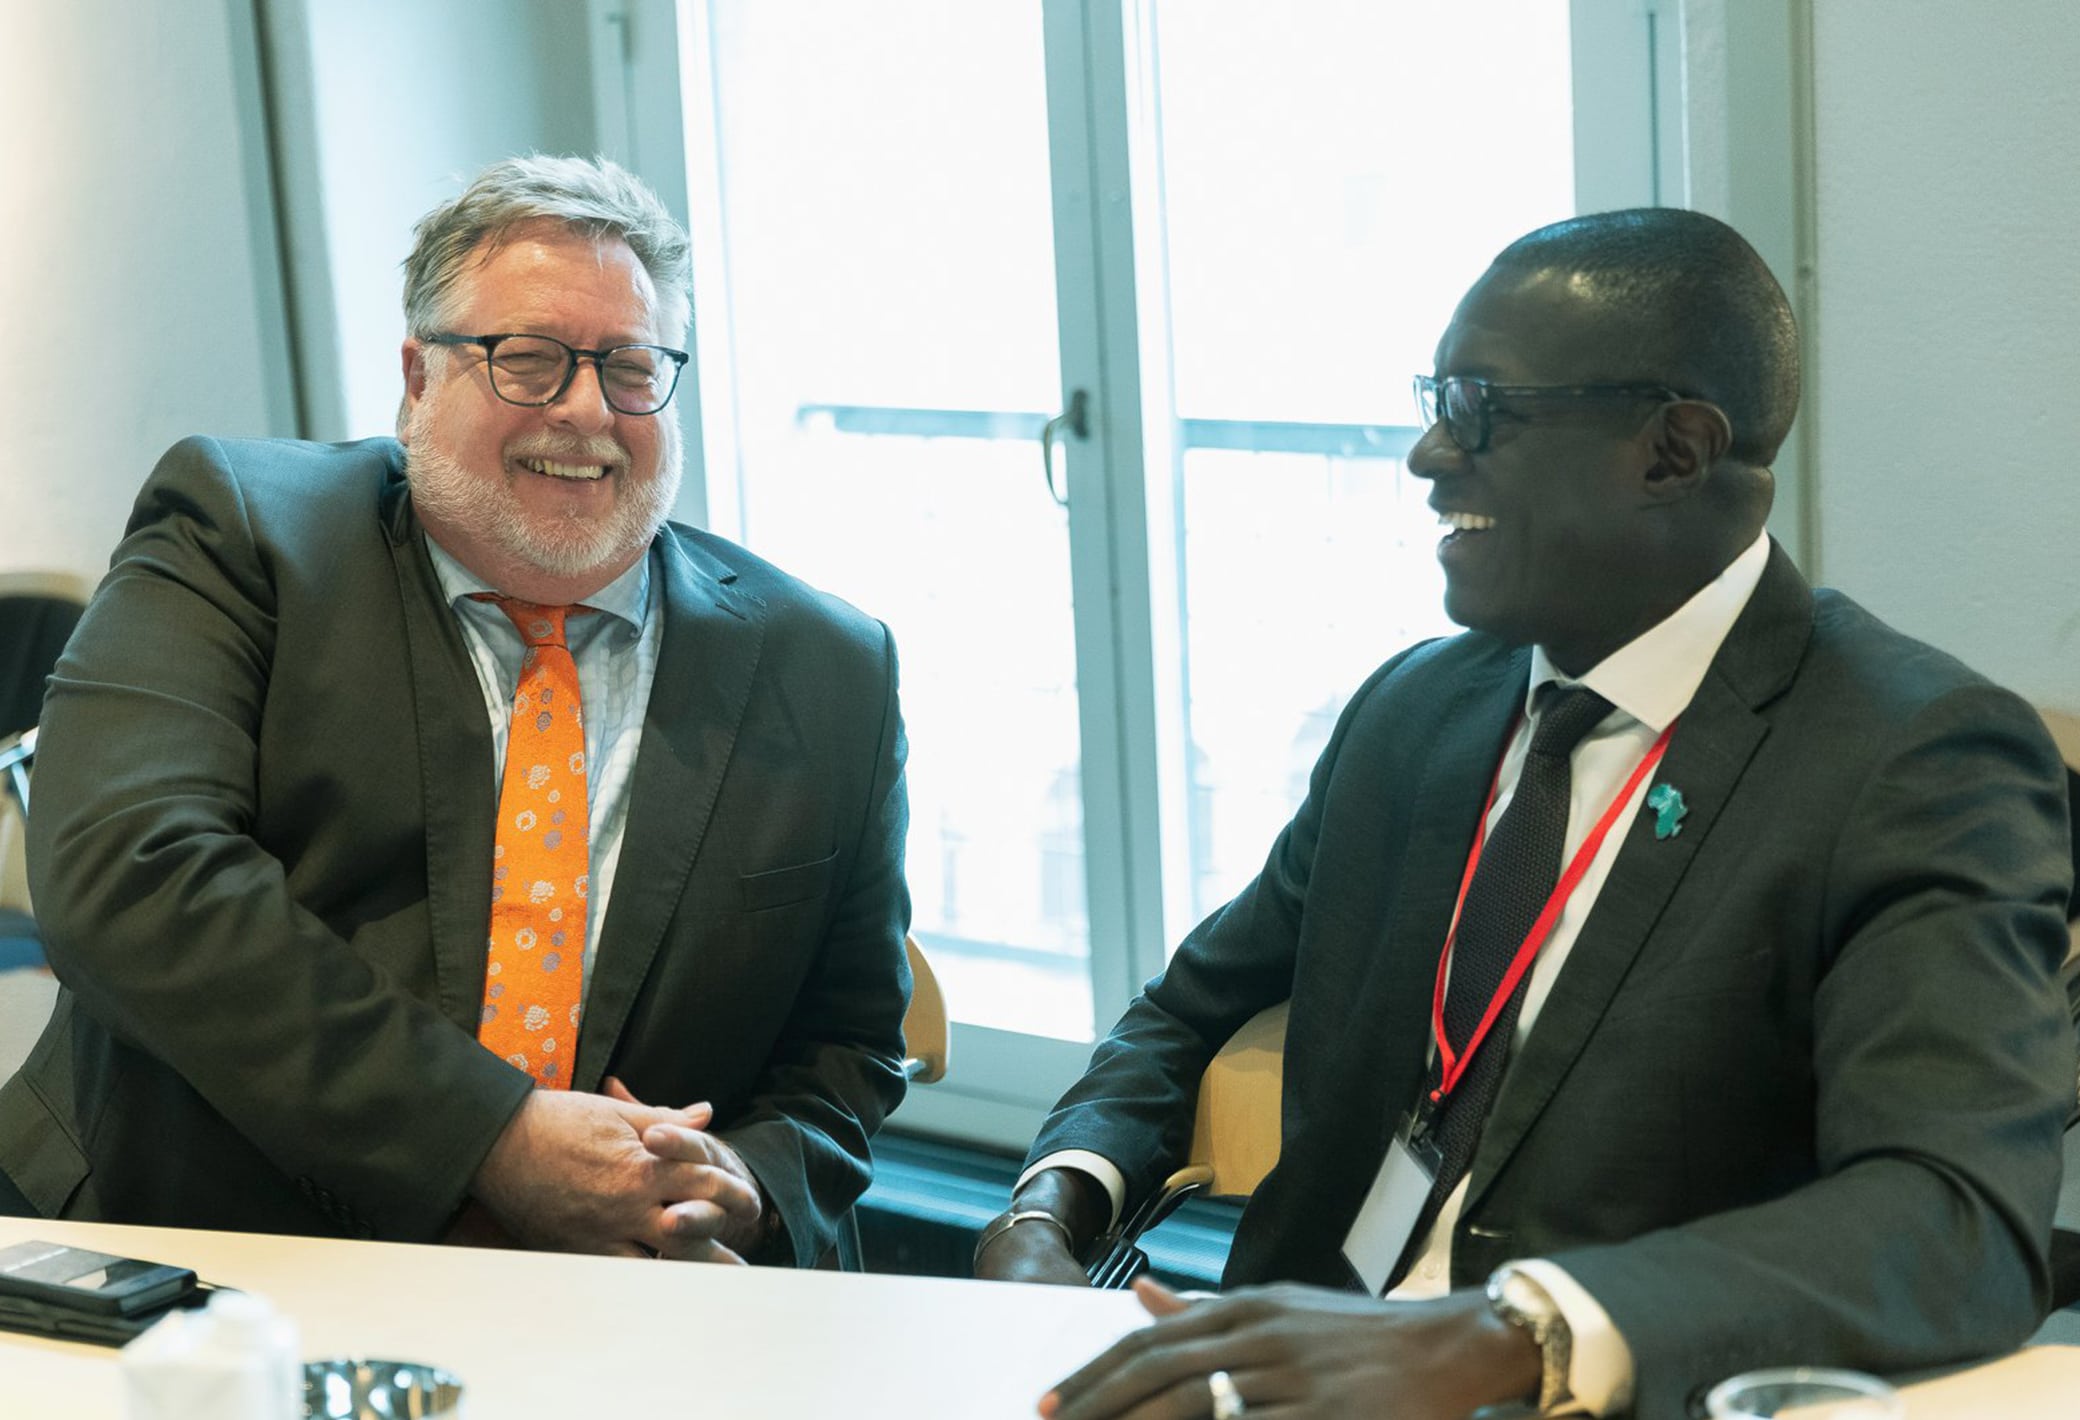 Beer Schröder, Advisor to the Nuffic Board of Directors, and Dr Cheikh Mbow, Director of START International, this year’s Danida Alumni Prize recipient. The Donor Harmonisation Group Forum was initiated by Beer Schröder in 2010. Photo: Crawfurd Media. 